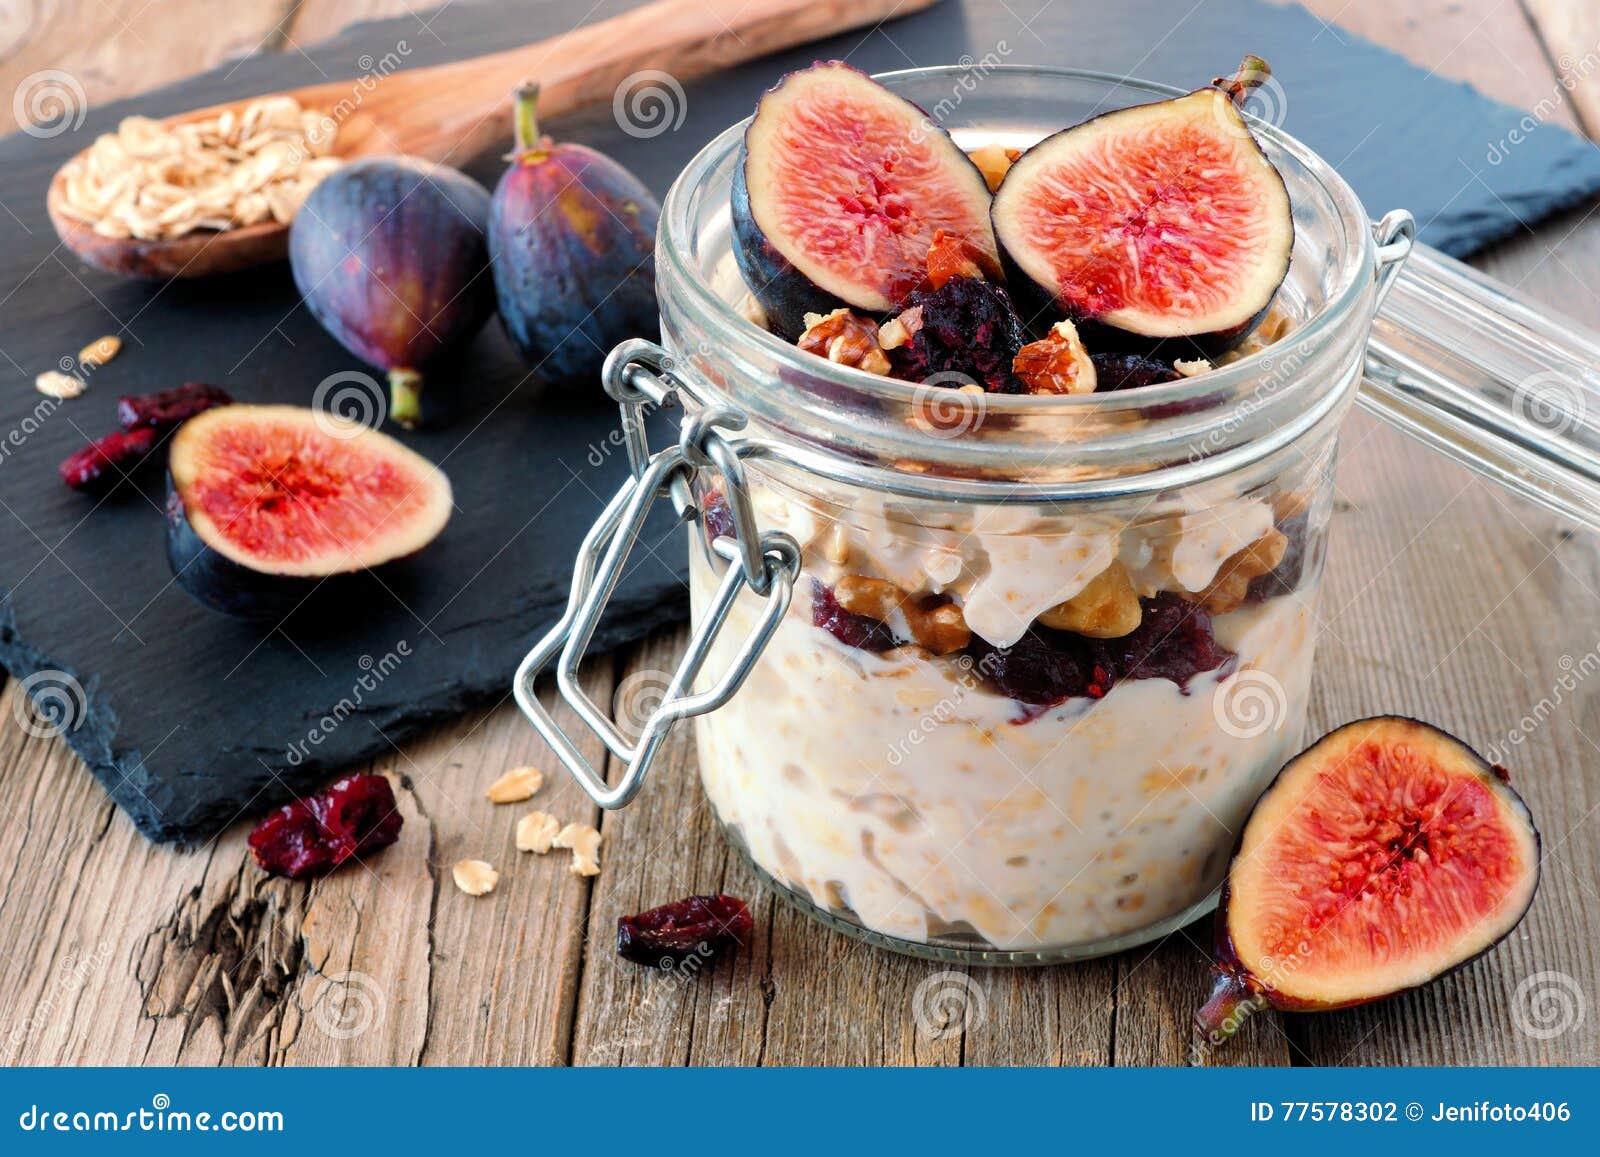 jar of overnight autumn oats with figs, cranberries and walnuts